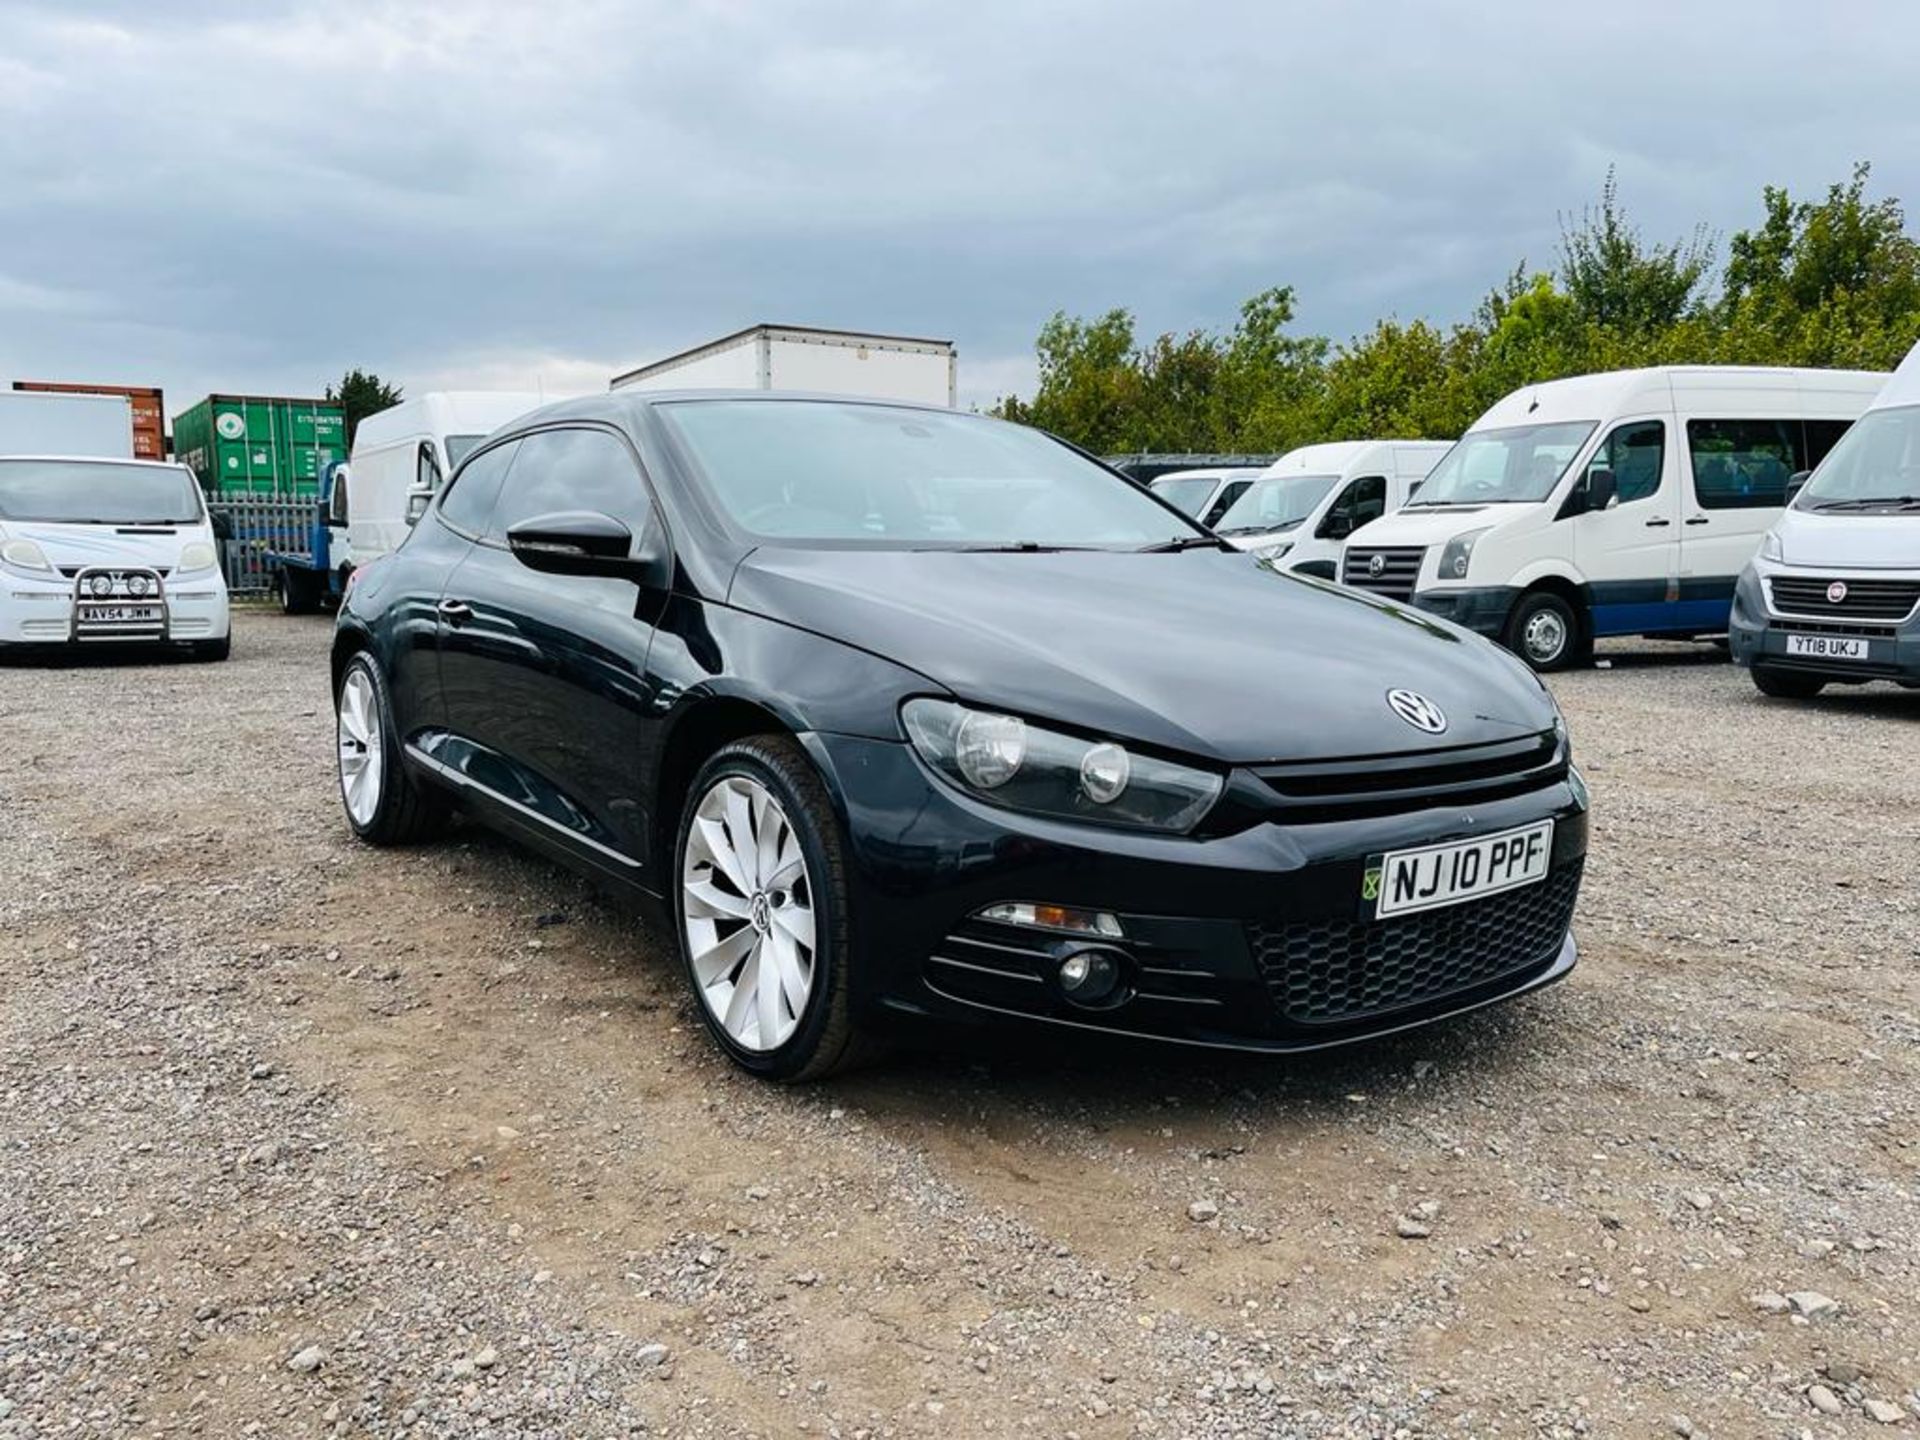 ** ON SALE ** Volkswagen Scirocco GT 2.0 TSI 210 Coupe 2010 '10 Reg' Sat Nav - A/C - Only 78719